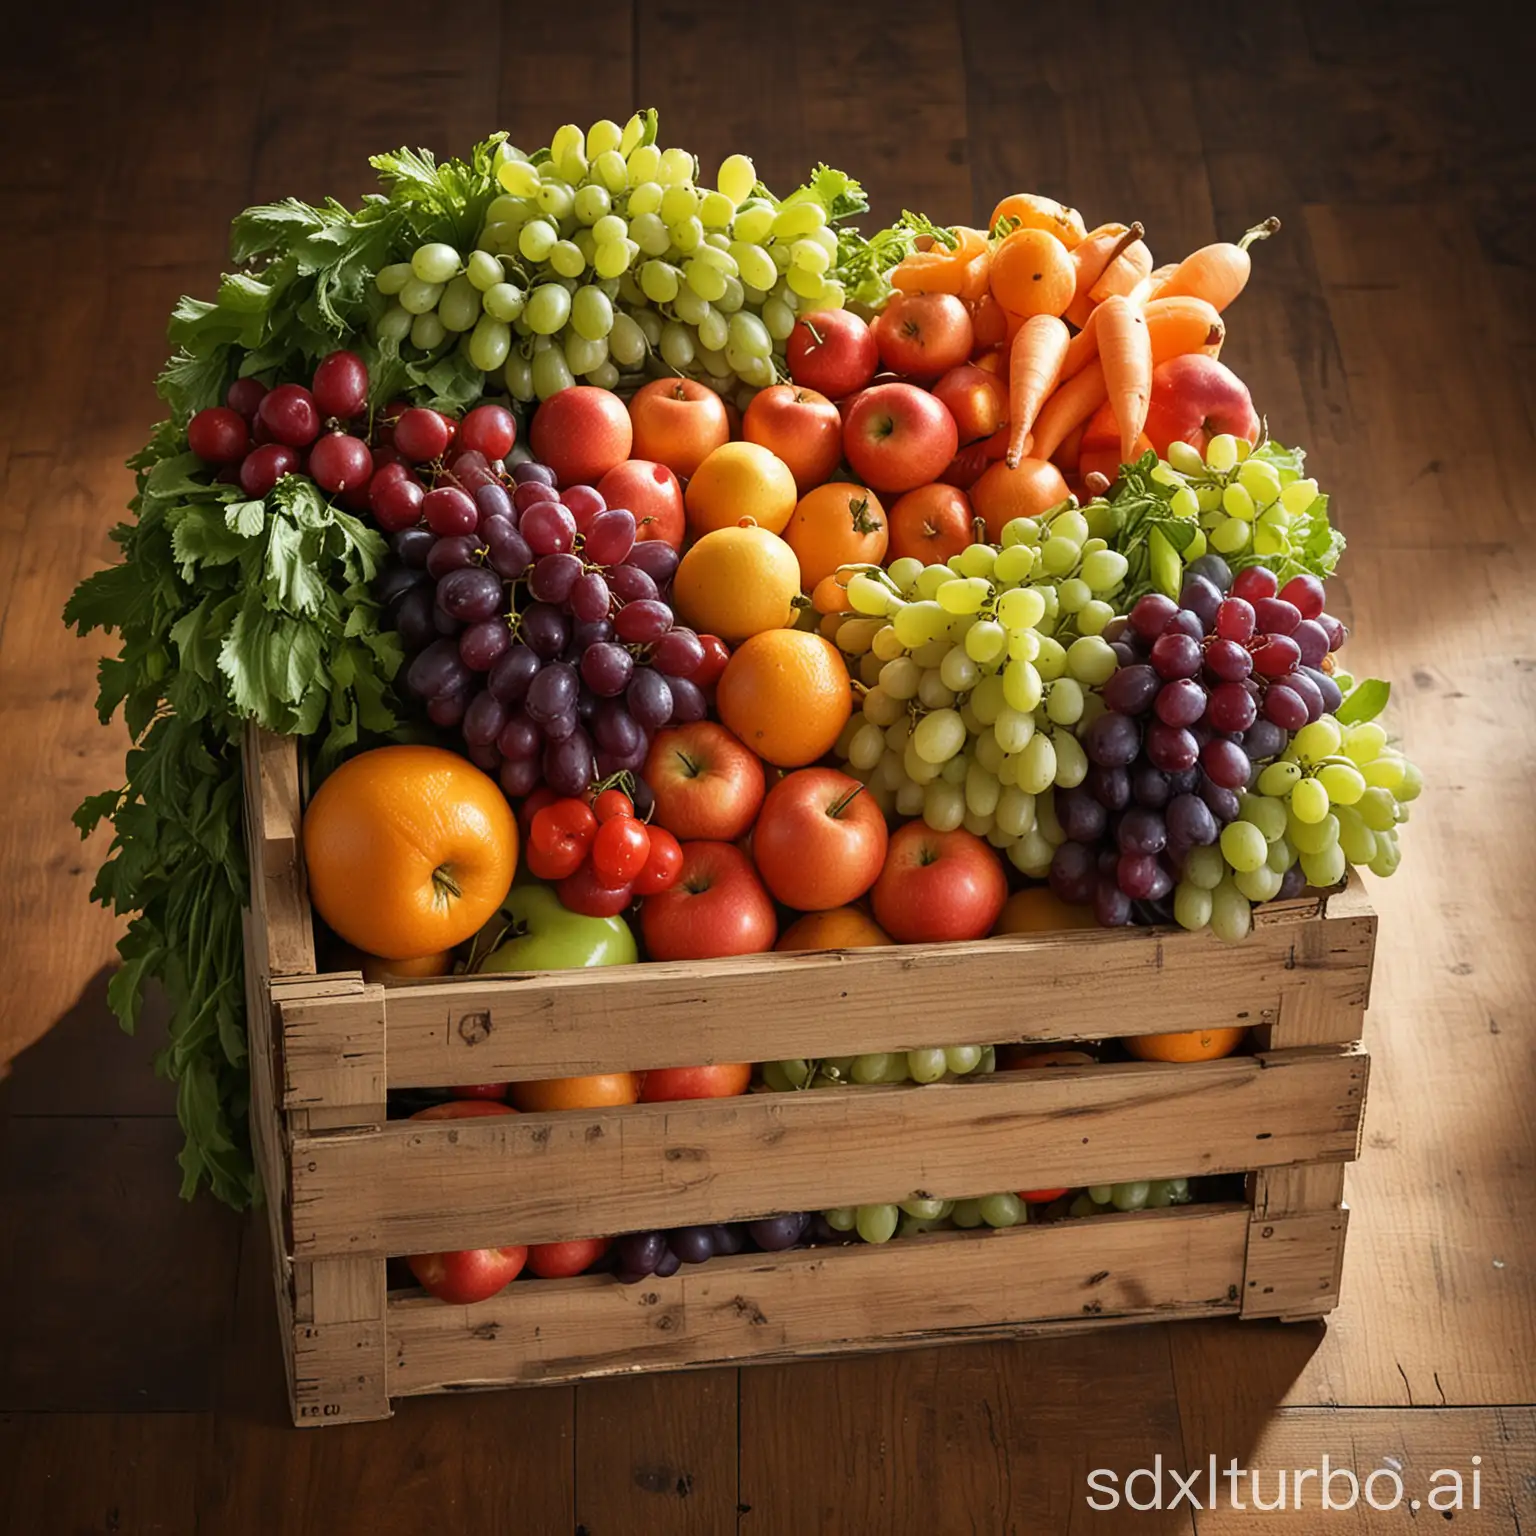 Vibrant-Fresh-Fruit-and-Vegetable-Display-Colorful-Assortment-in-Wooden-Crate